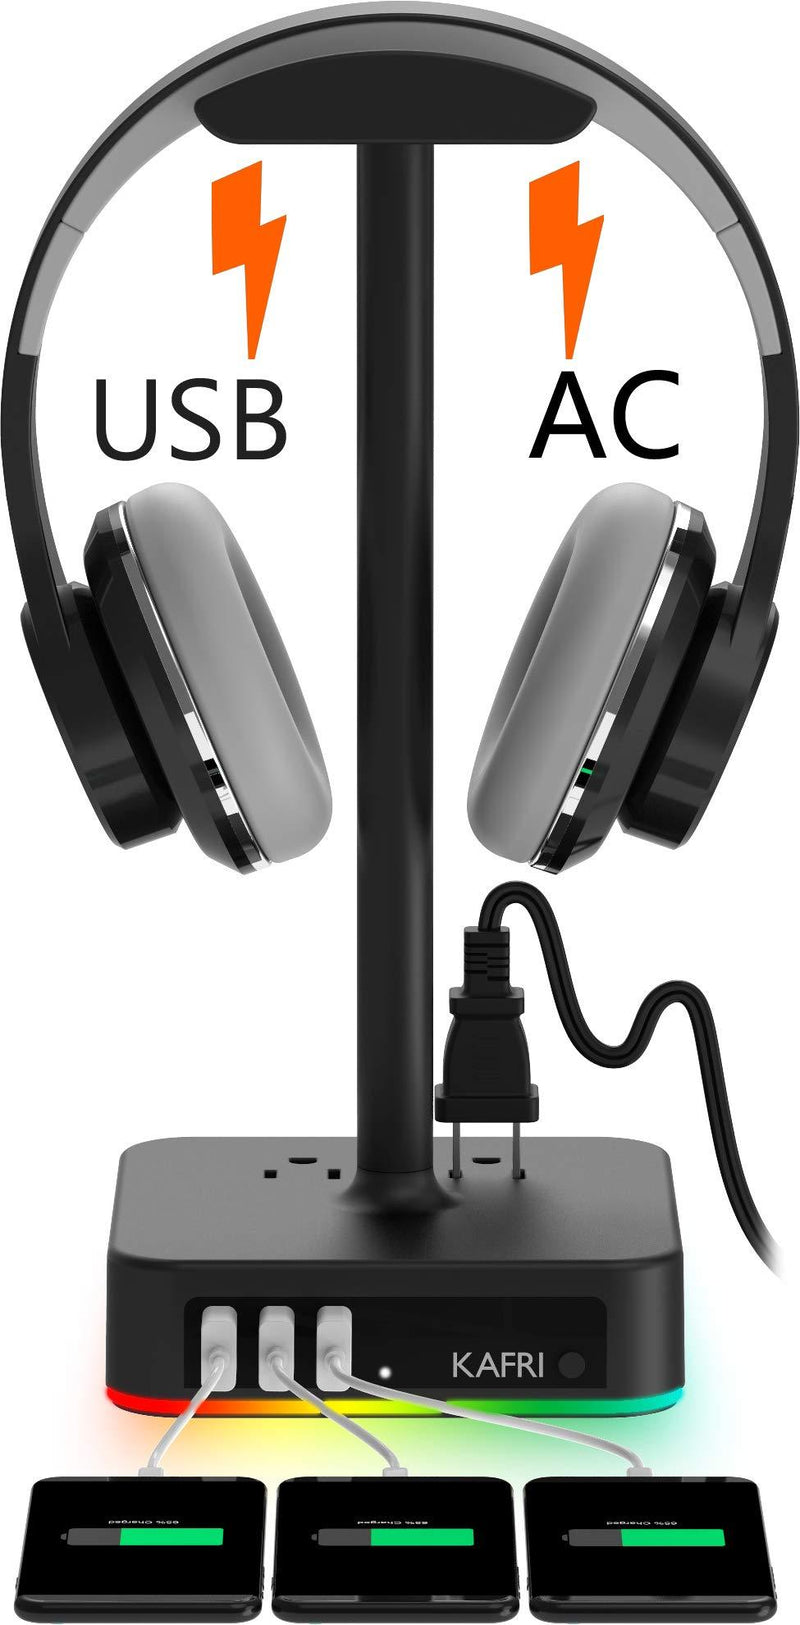 KAFRI RGB Headphone Stand with USB Charger Desk Gaming Headset Holder Hanger Rack with 3 USB Charging Port and 2 Outlet - Suitable for Gamer Desktop Table Game Earphone Accessories Boyfriend Gift